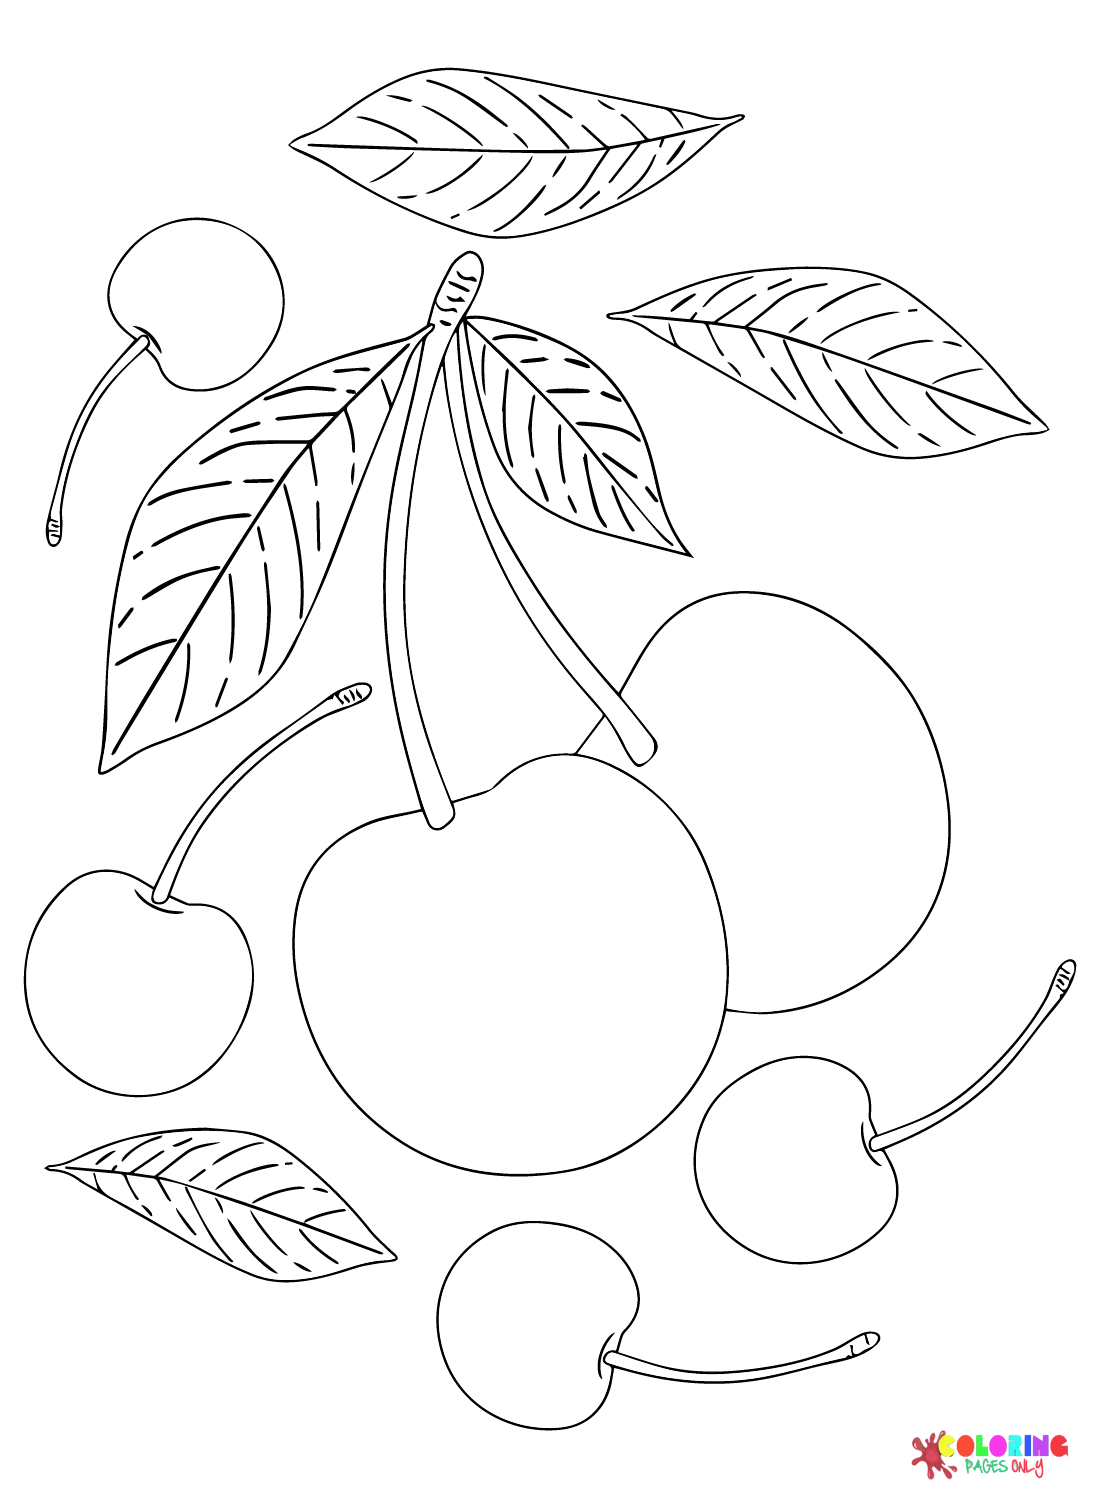 Cherry Images Coloring Page